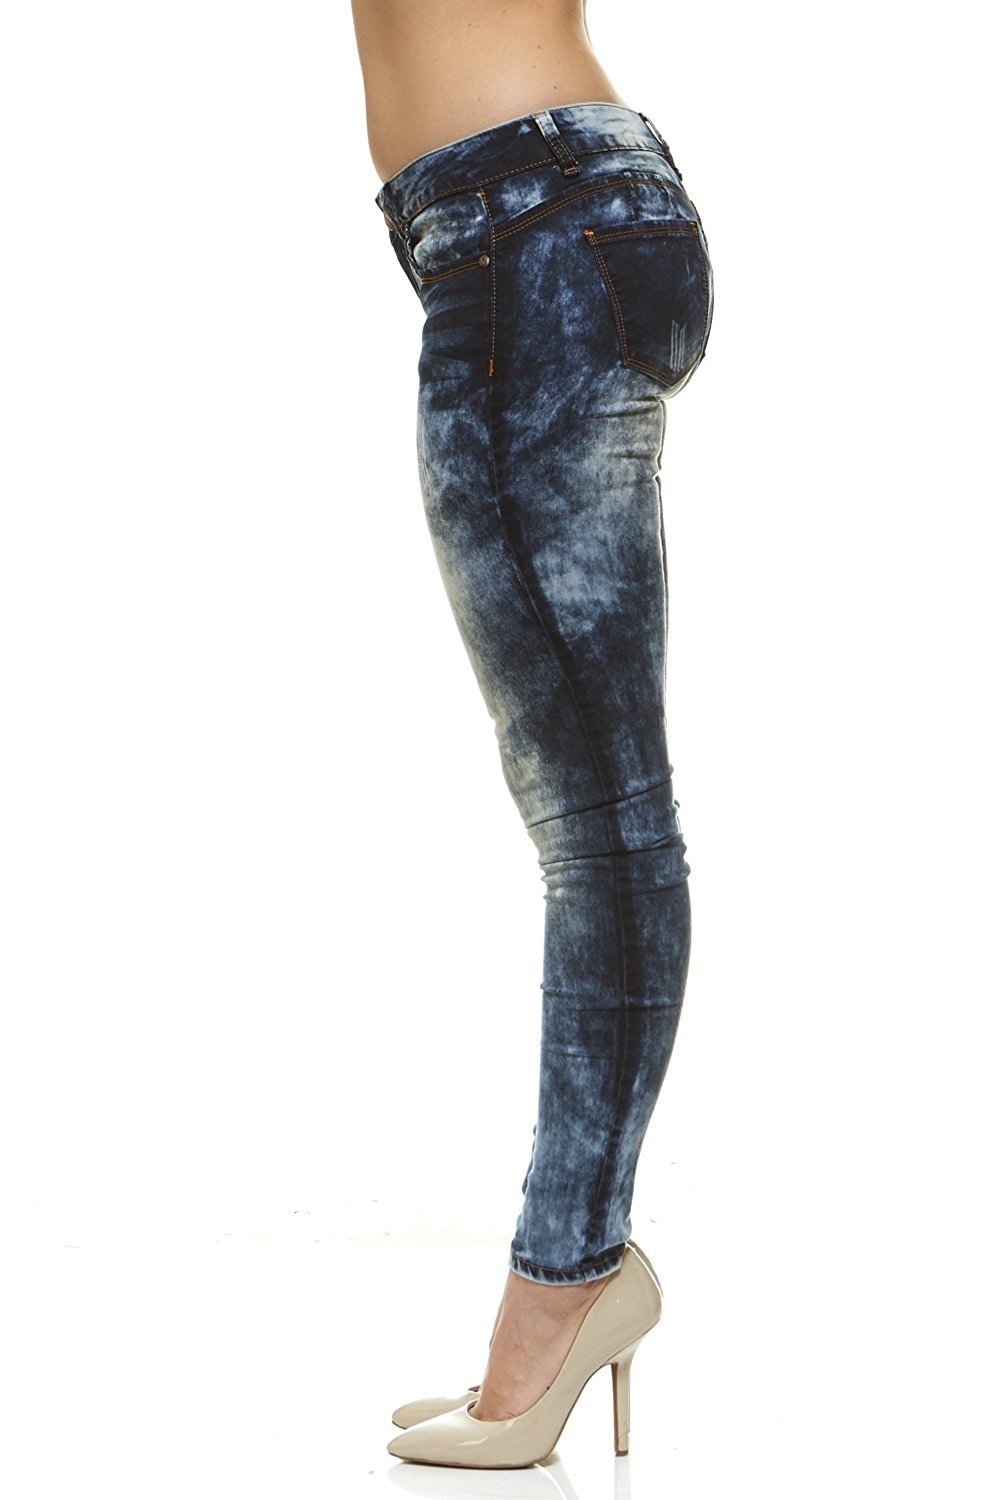 VIP JEANS Classic Skinny Jeans For Teen Girls Slim Fit Stretch Stone Washed Jeans In Junior or Plus Size - image 2 of 10